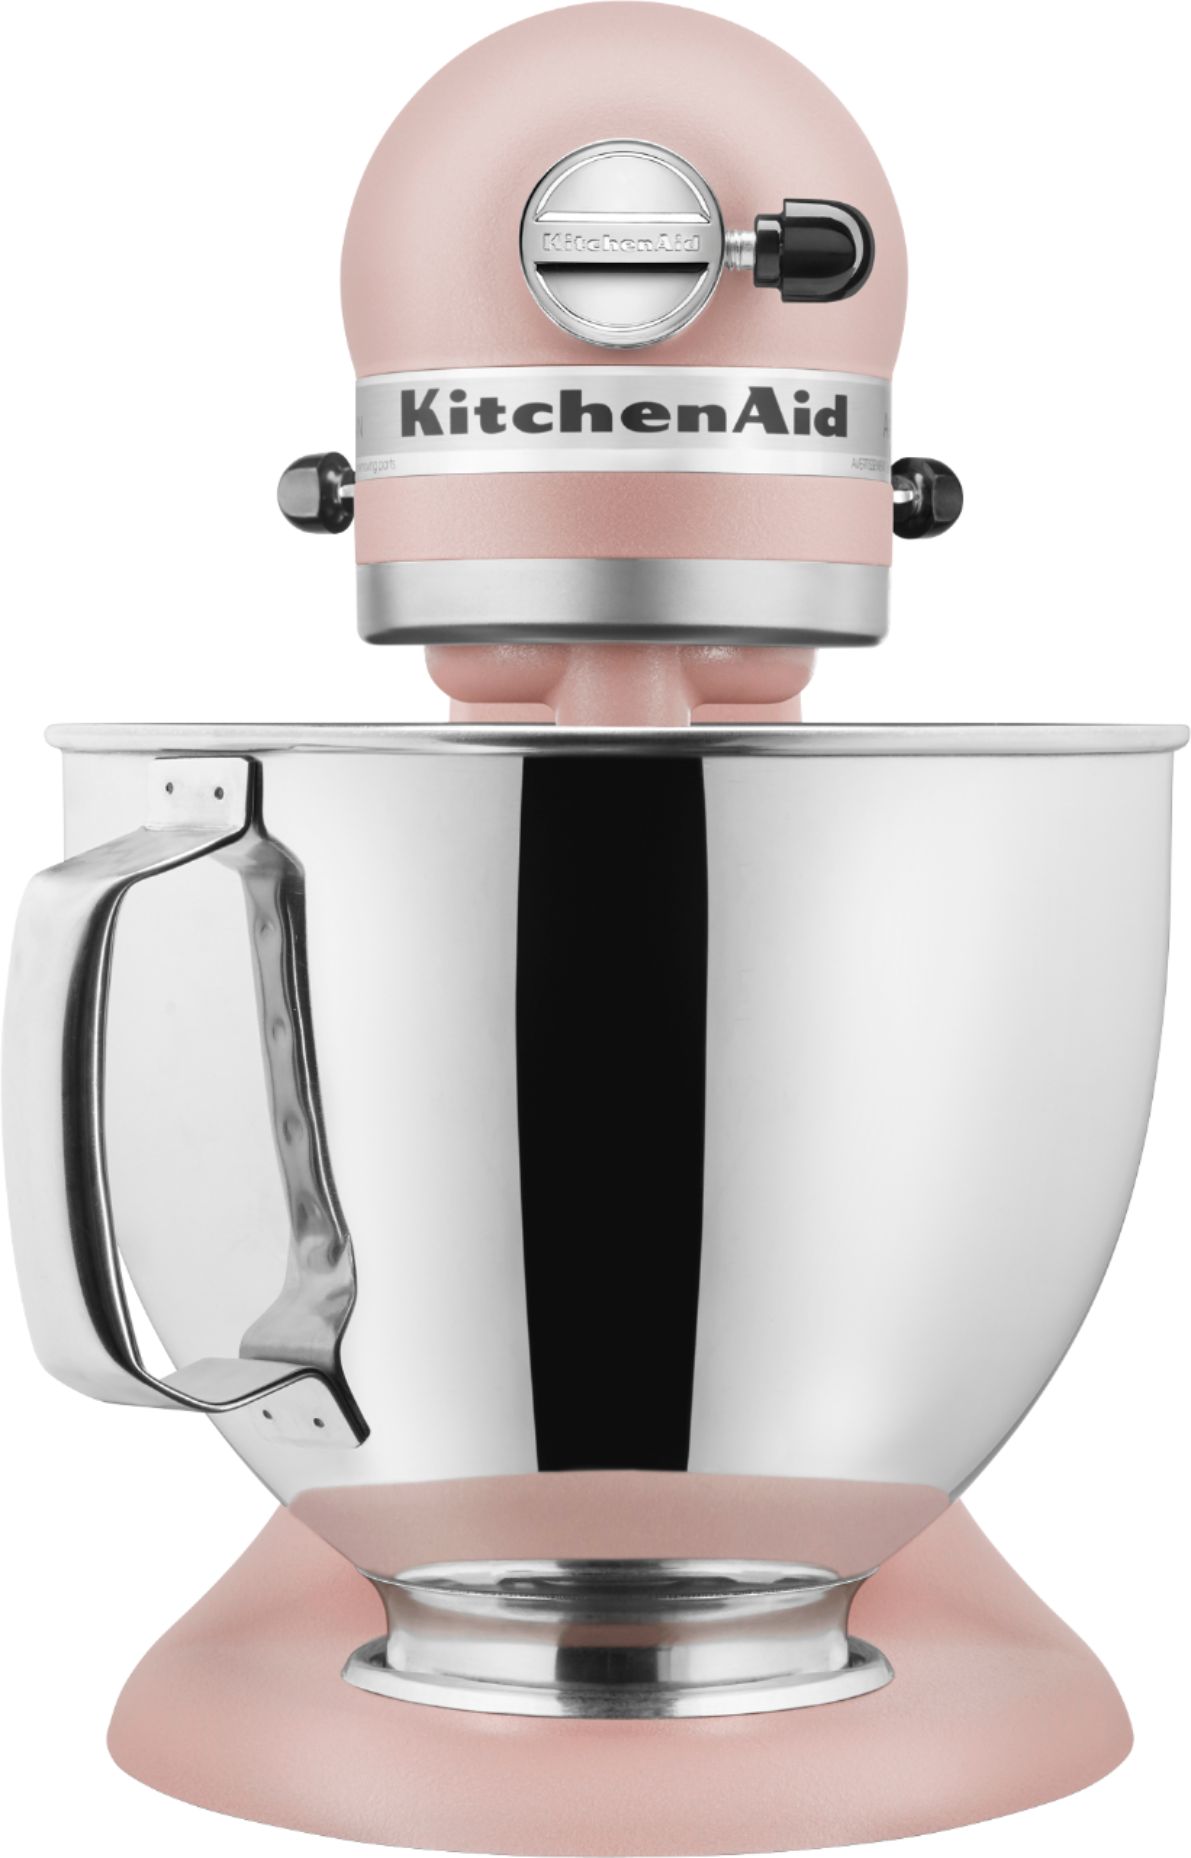 KSM150PSFT in Feather Pink by KitchenAid in Fayetteville, TN - Artisan®  Series 5 Quart Tilt-Head Stand Mixer